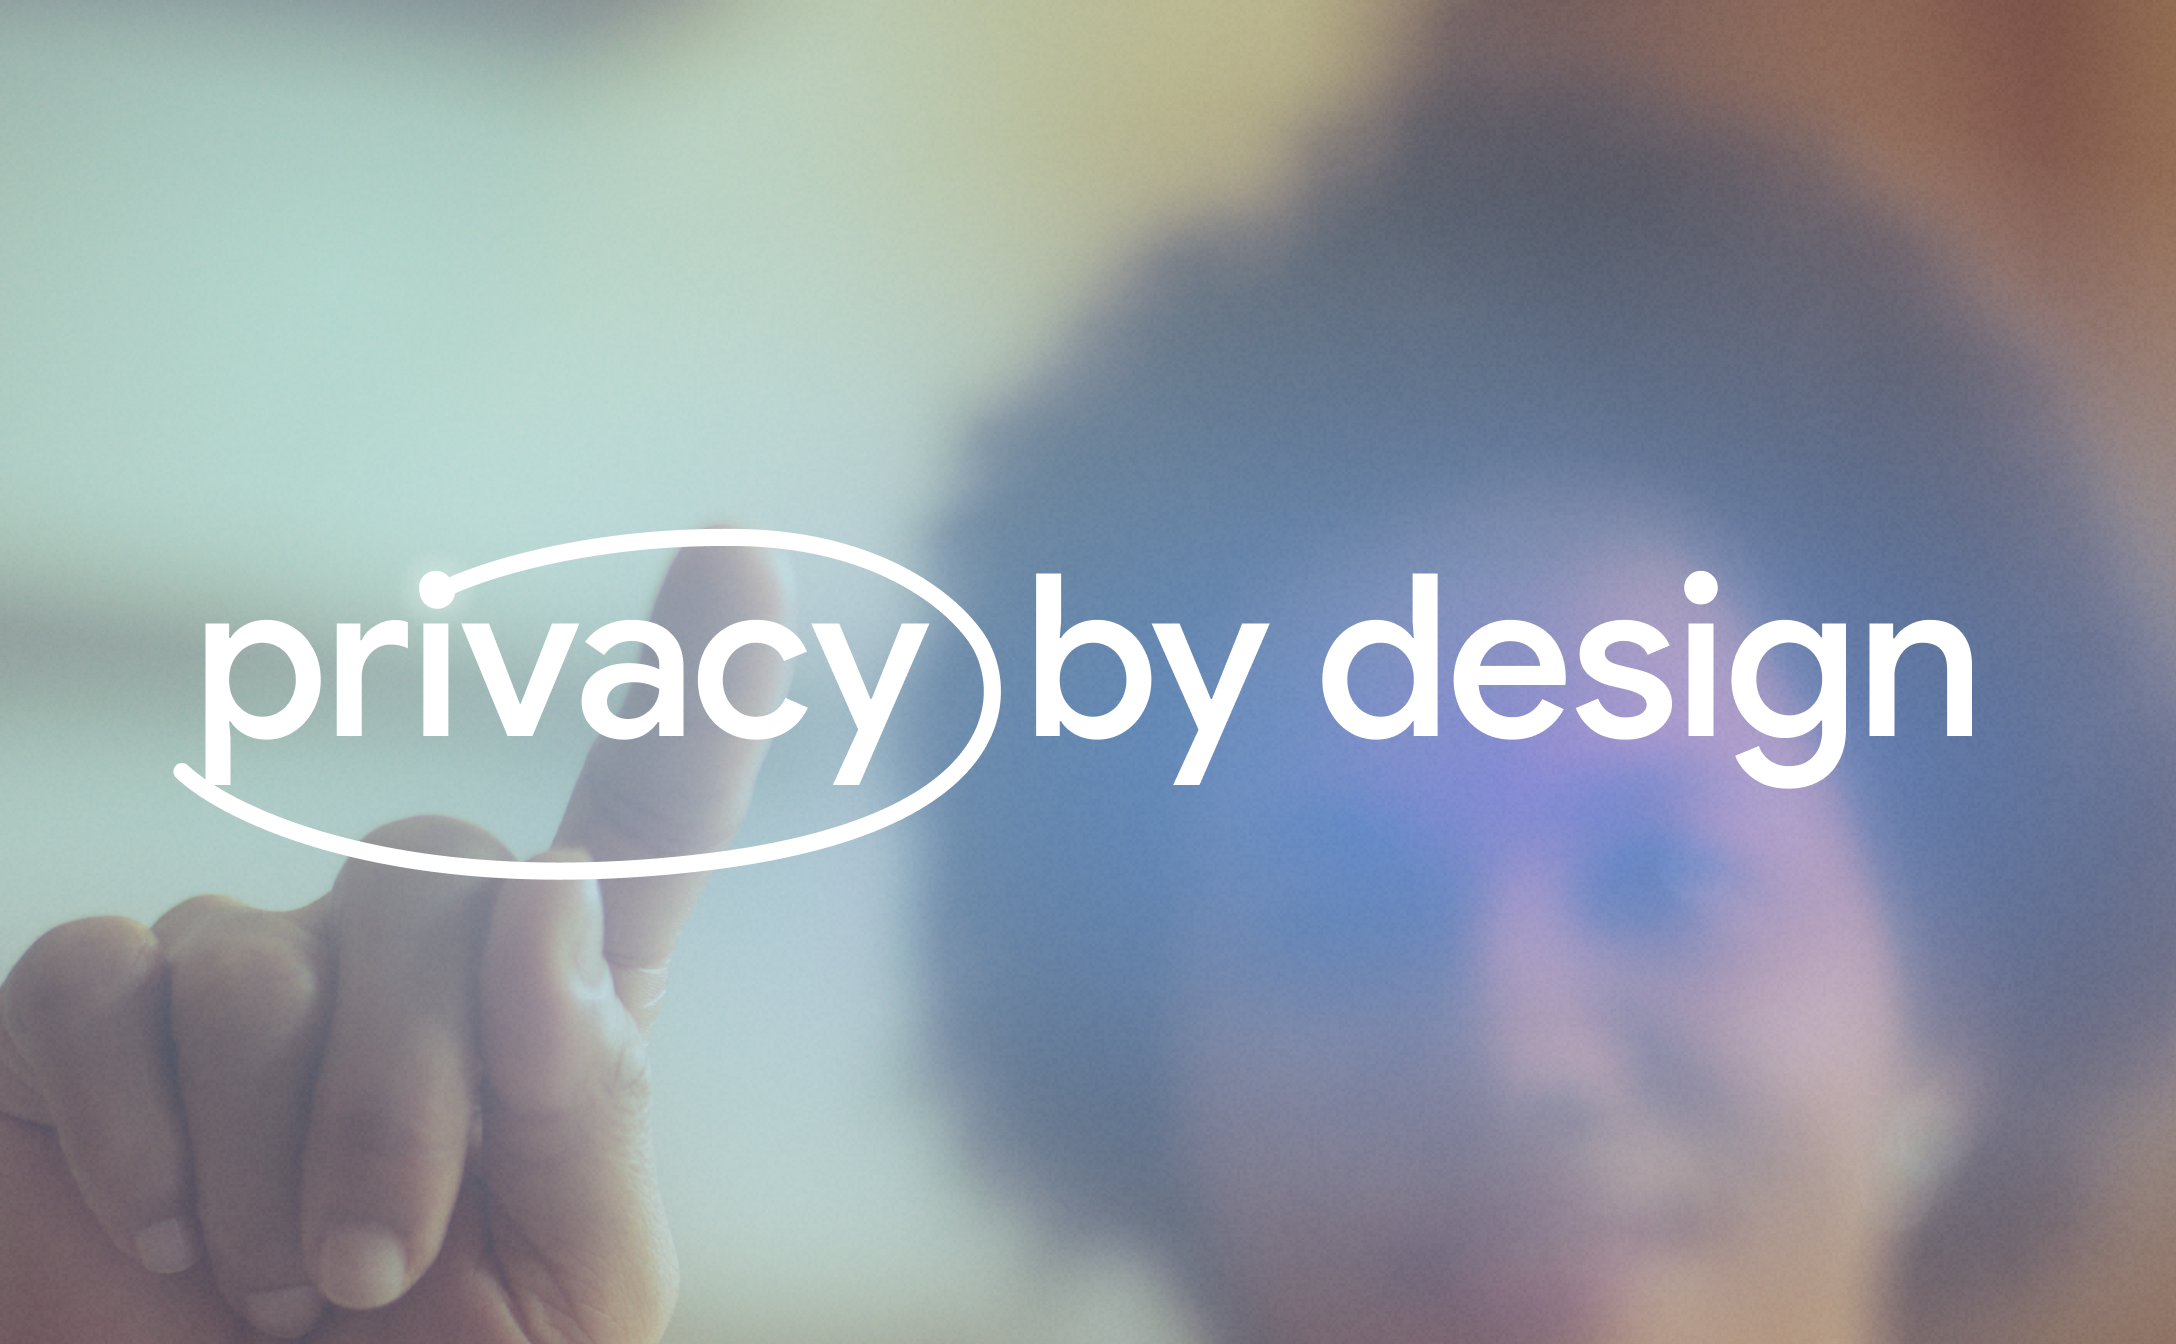 An image of the phrase “privacy by design” with someone circling the word privacy.